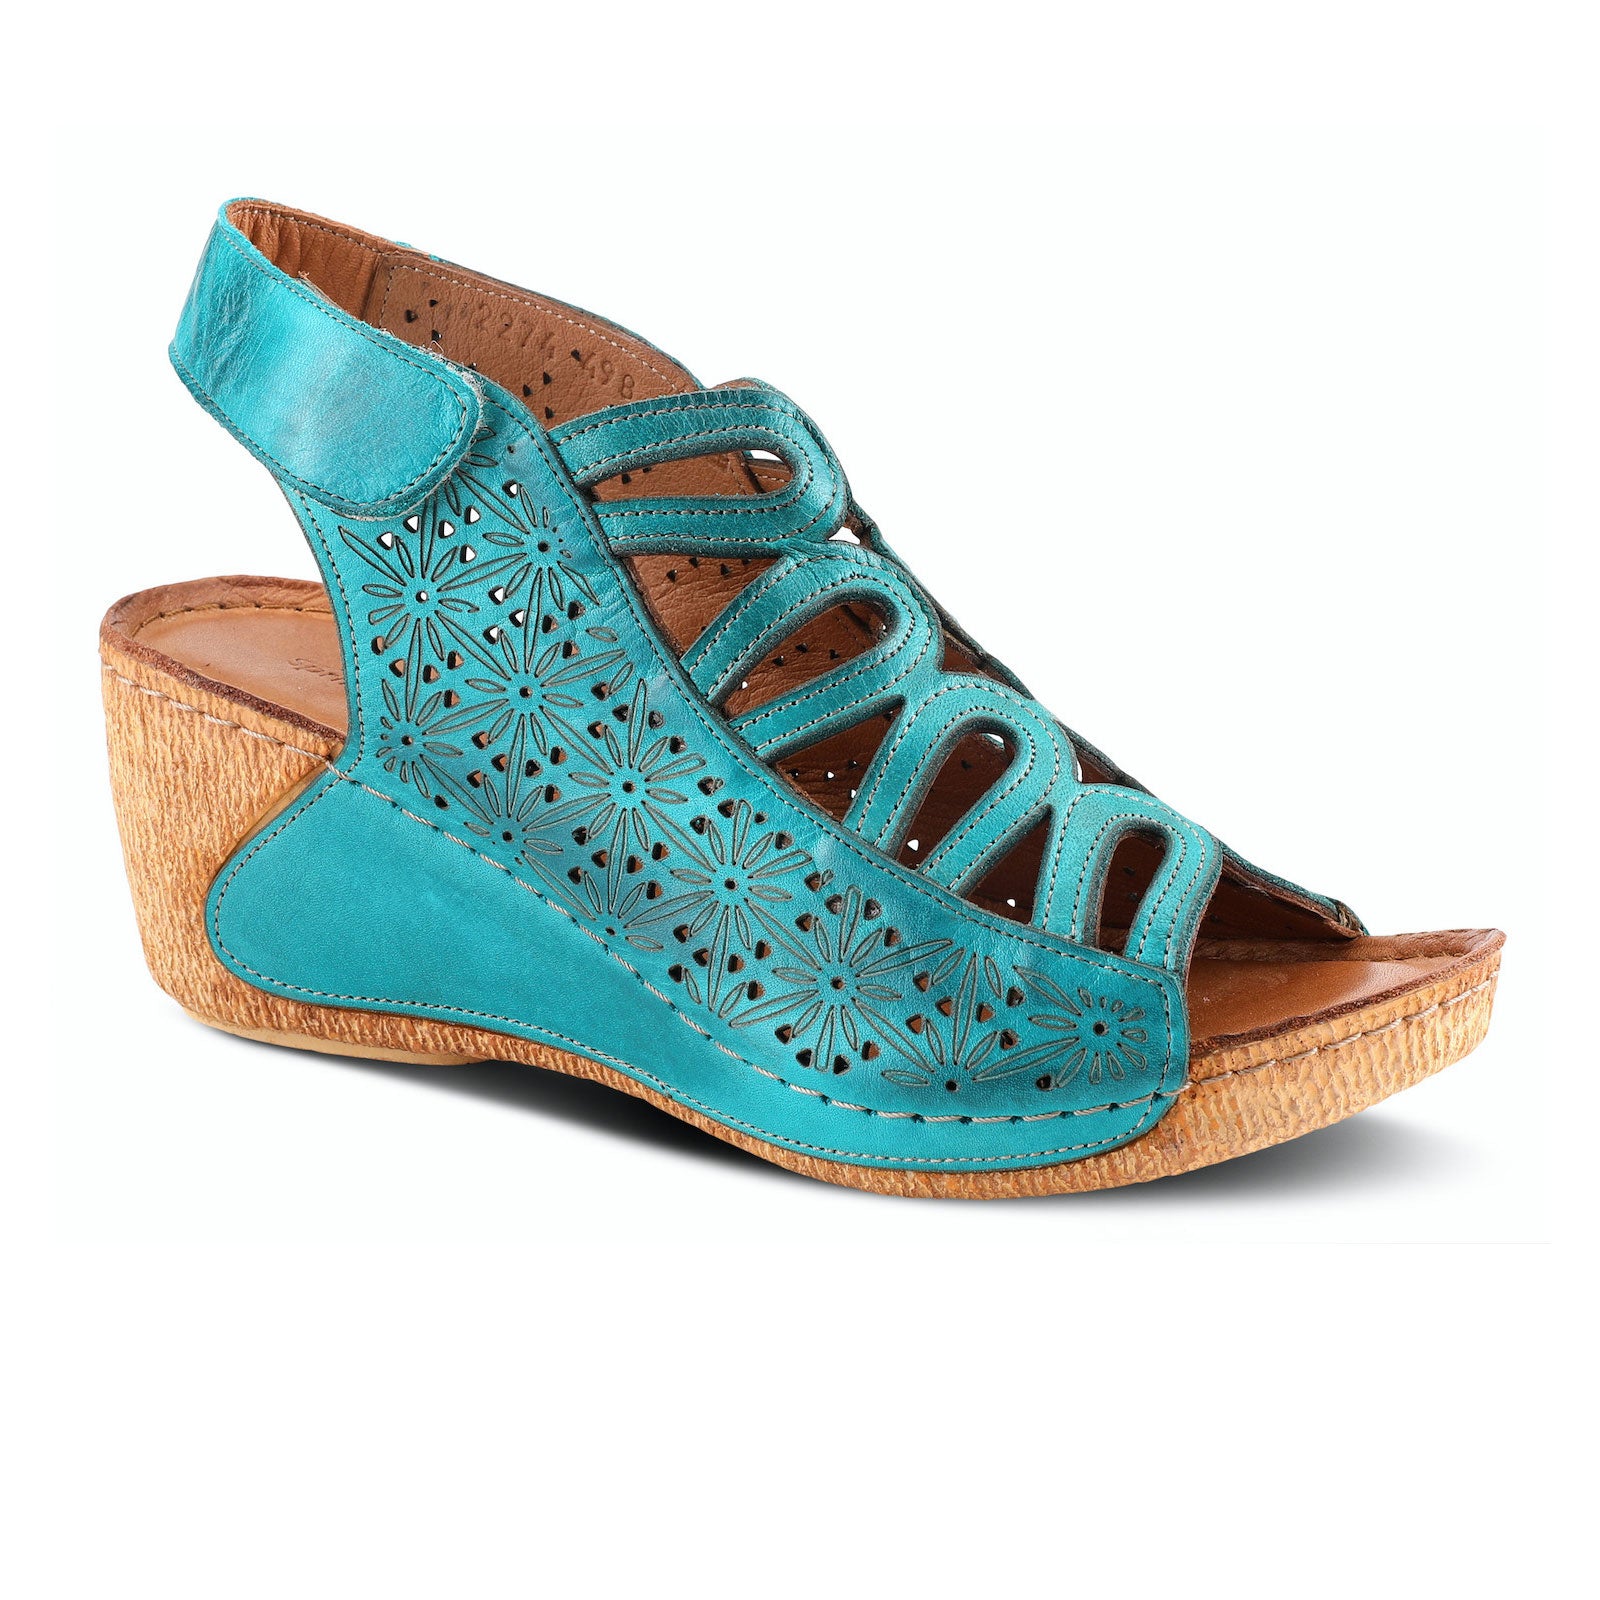 Spring Step Inocencia Wedge Sandal (Women) - Turquoise Sandals - Wedge - The Heel Shoe Fitters